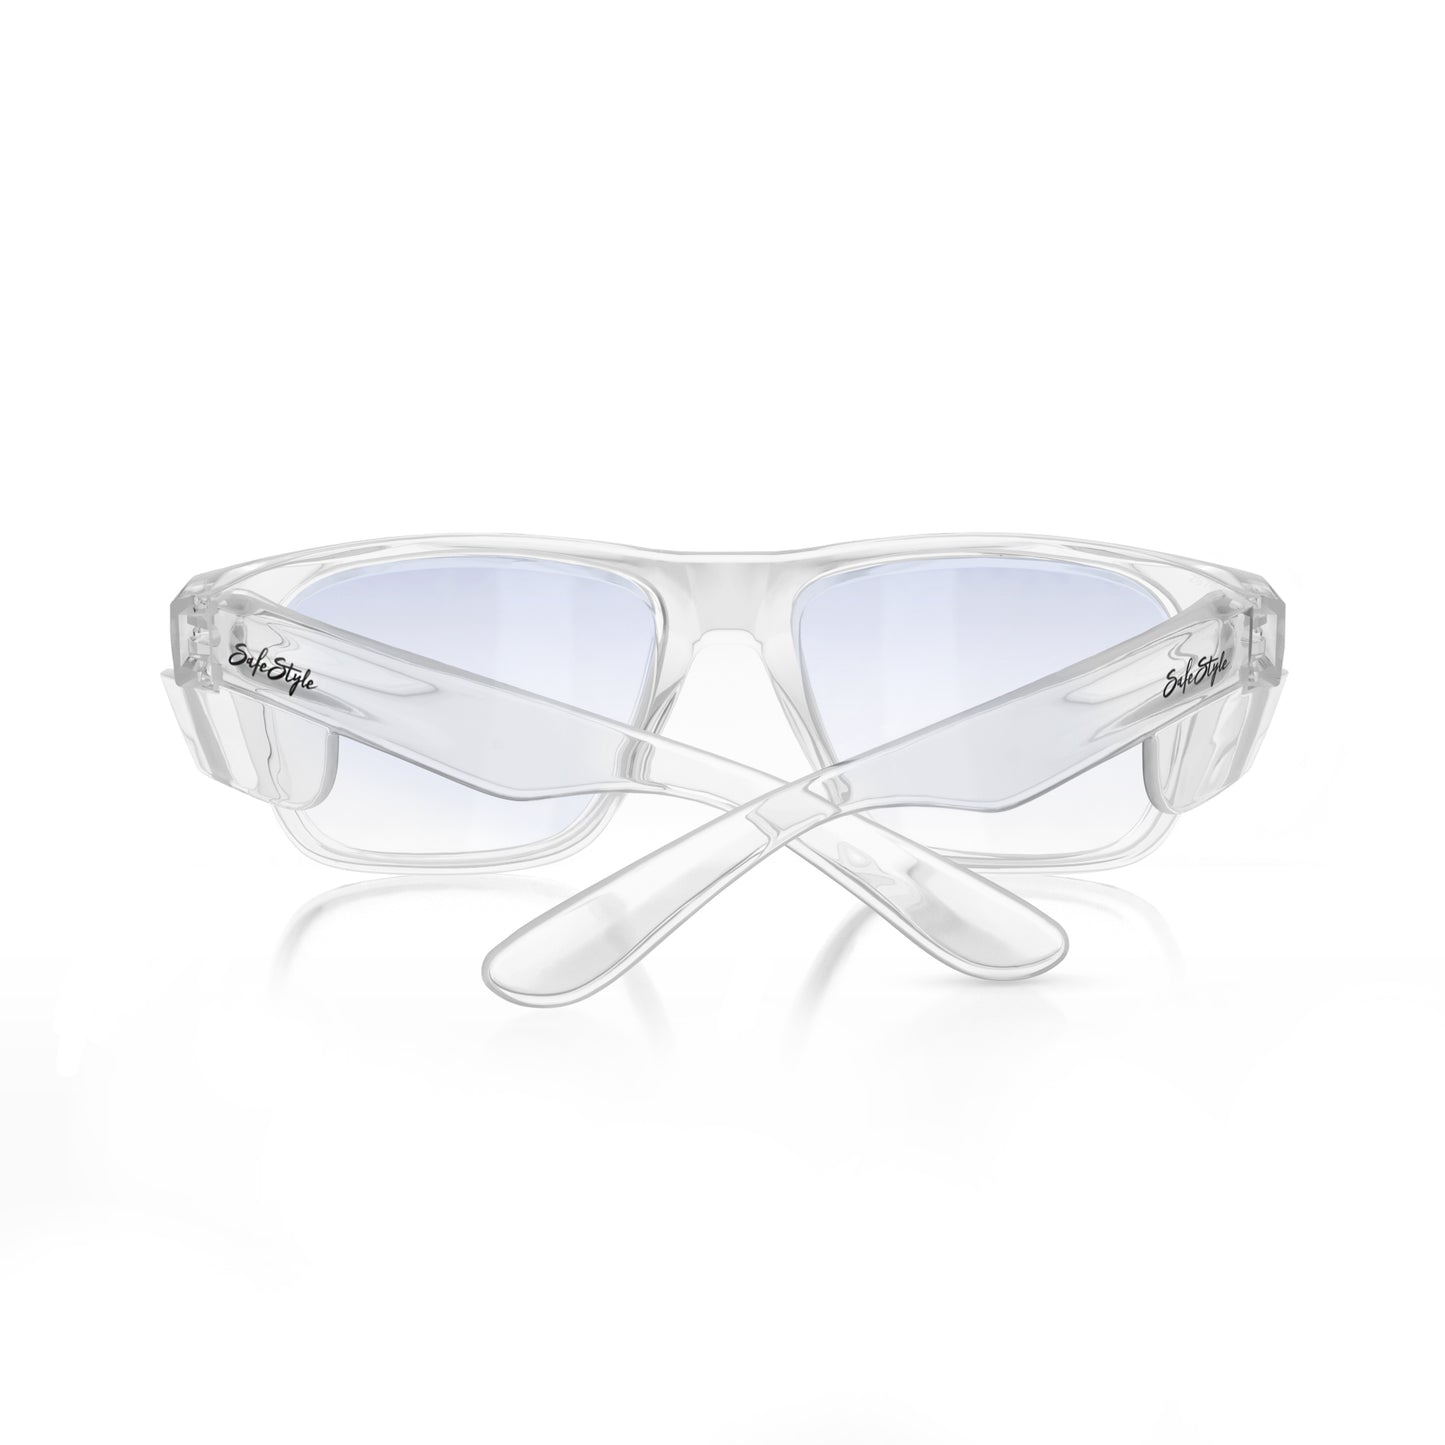 SafeStyle Fusions Clear Frame/Blue Light Blocking UV400